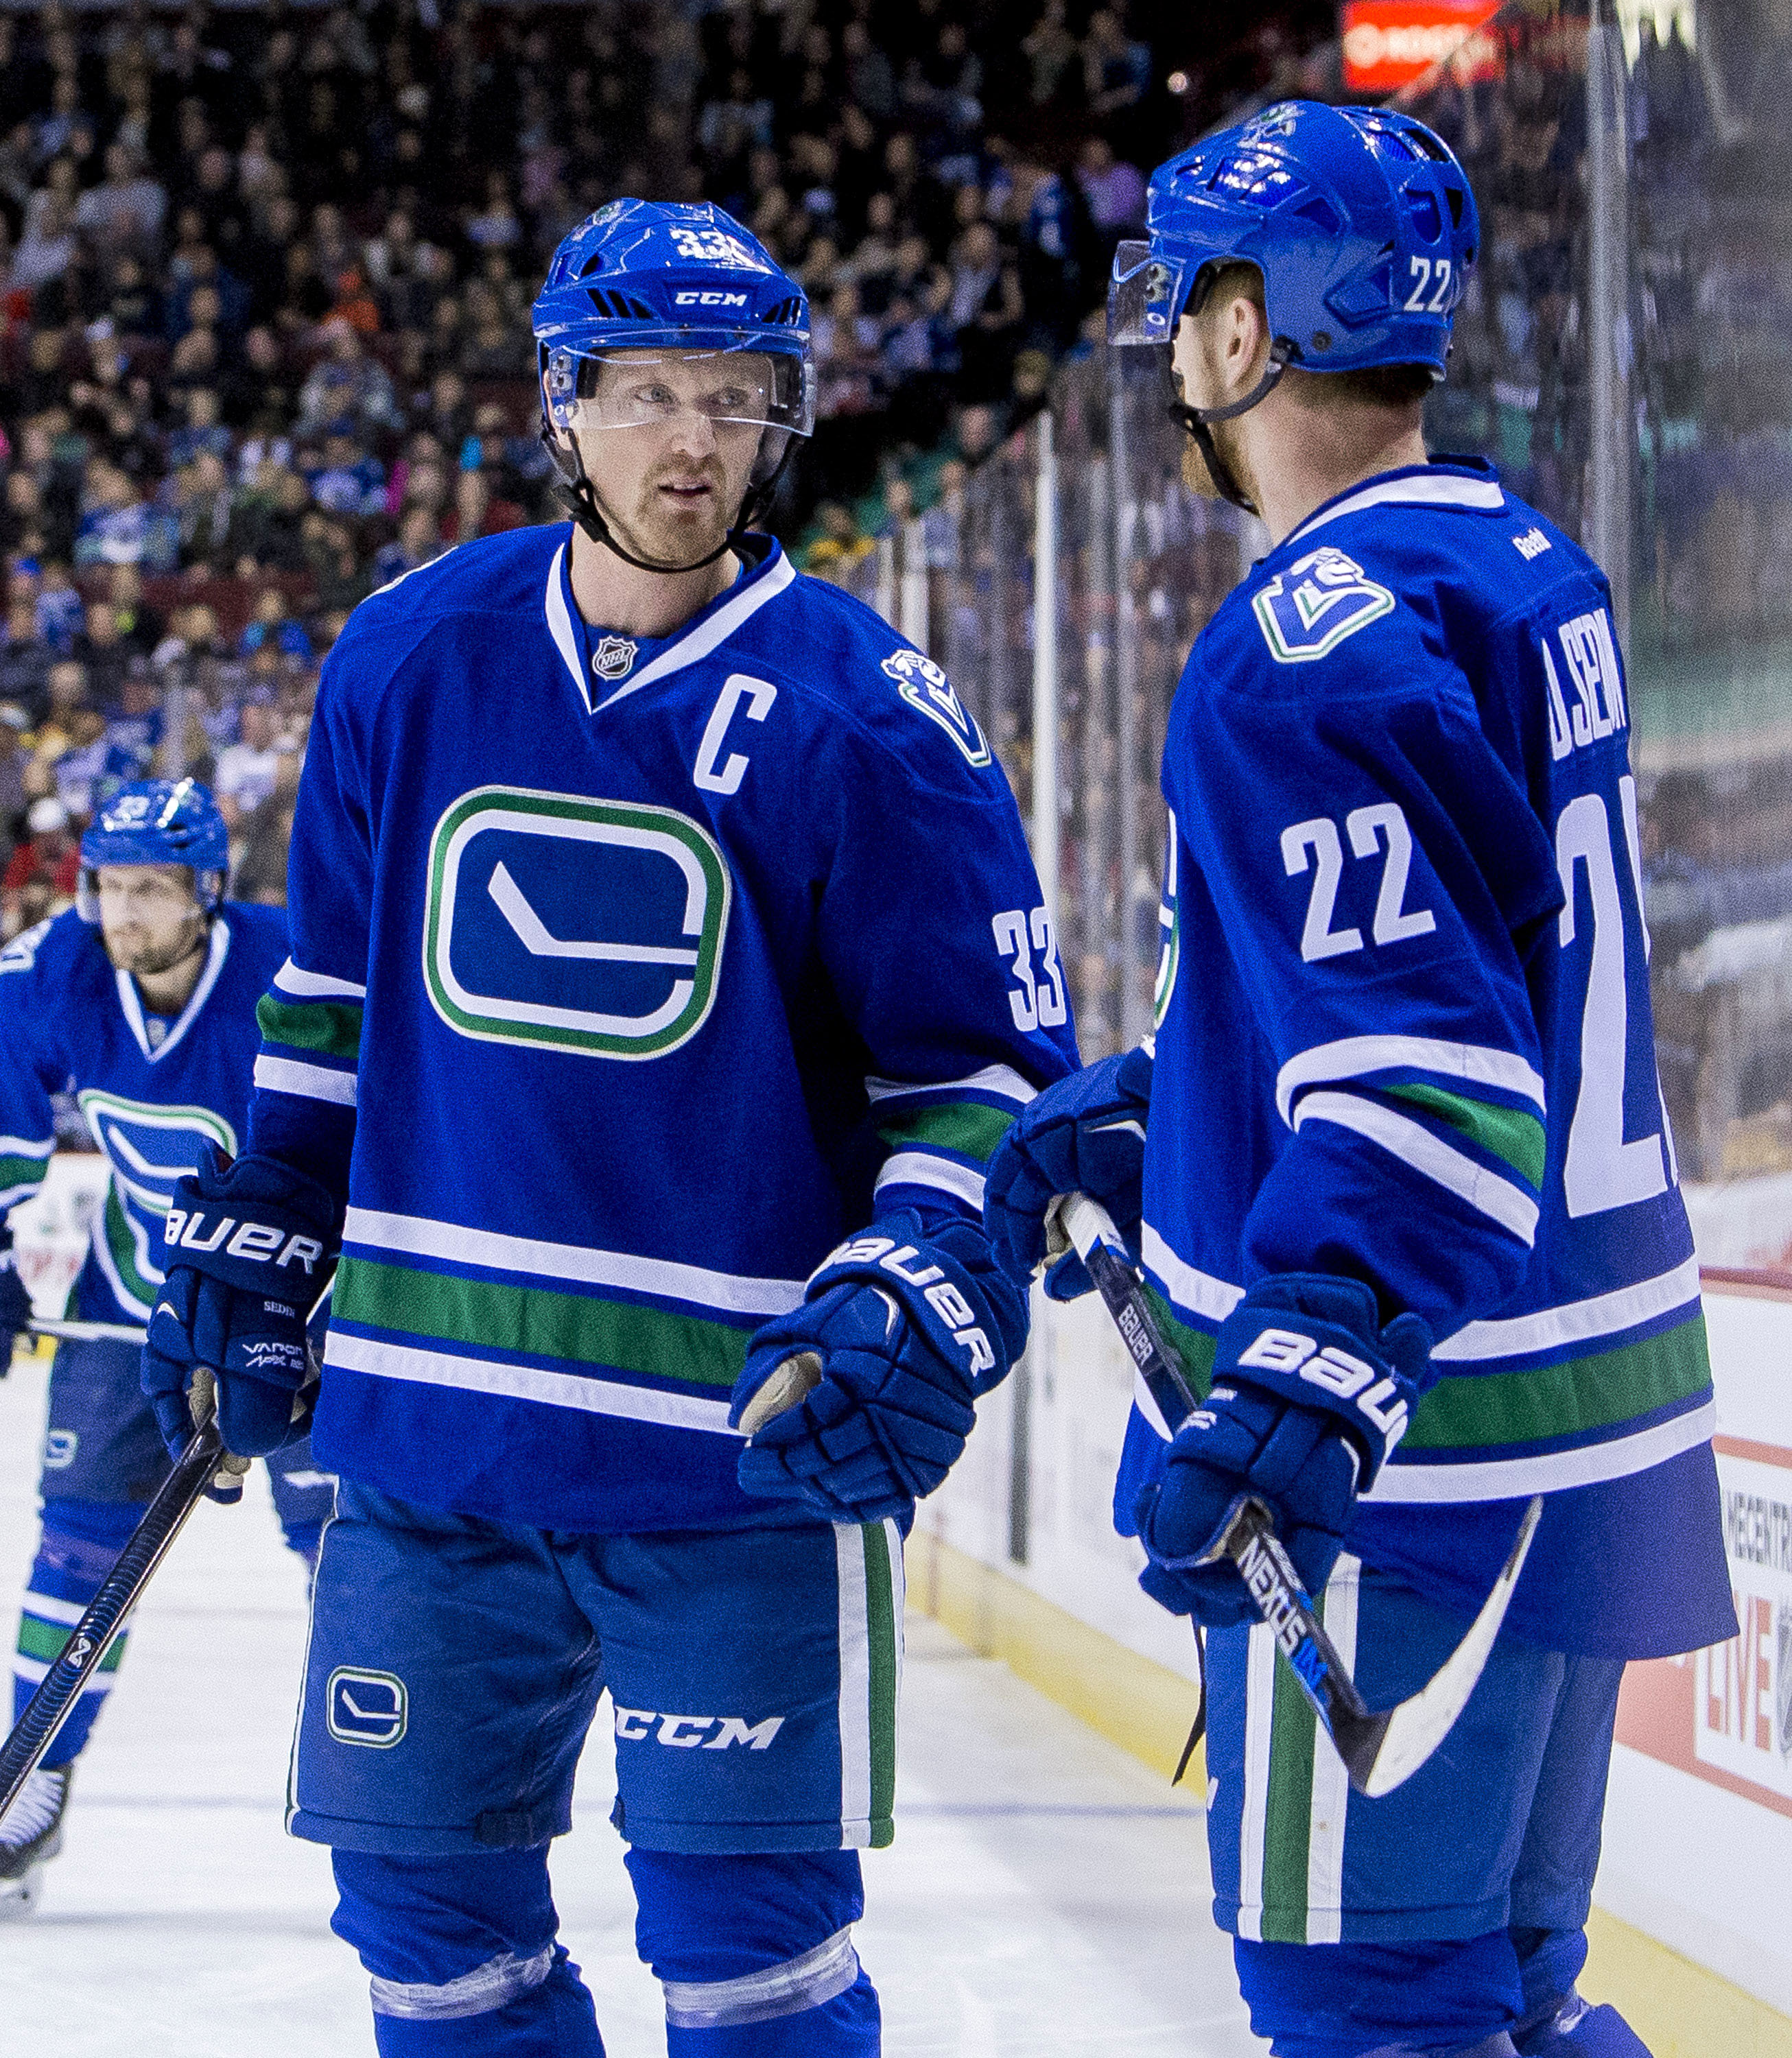 Photos: A Look Back at the 18 Years of the Sedin Twins in